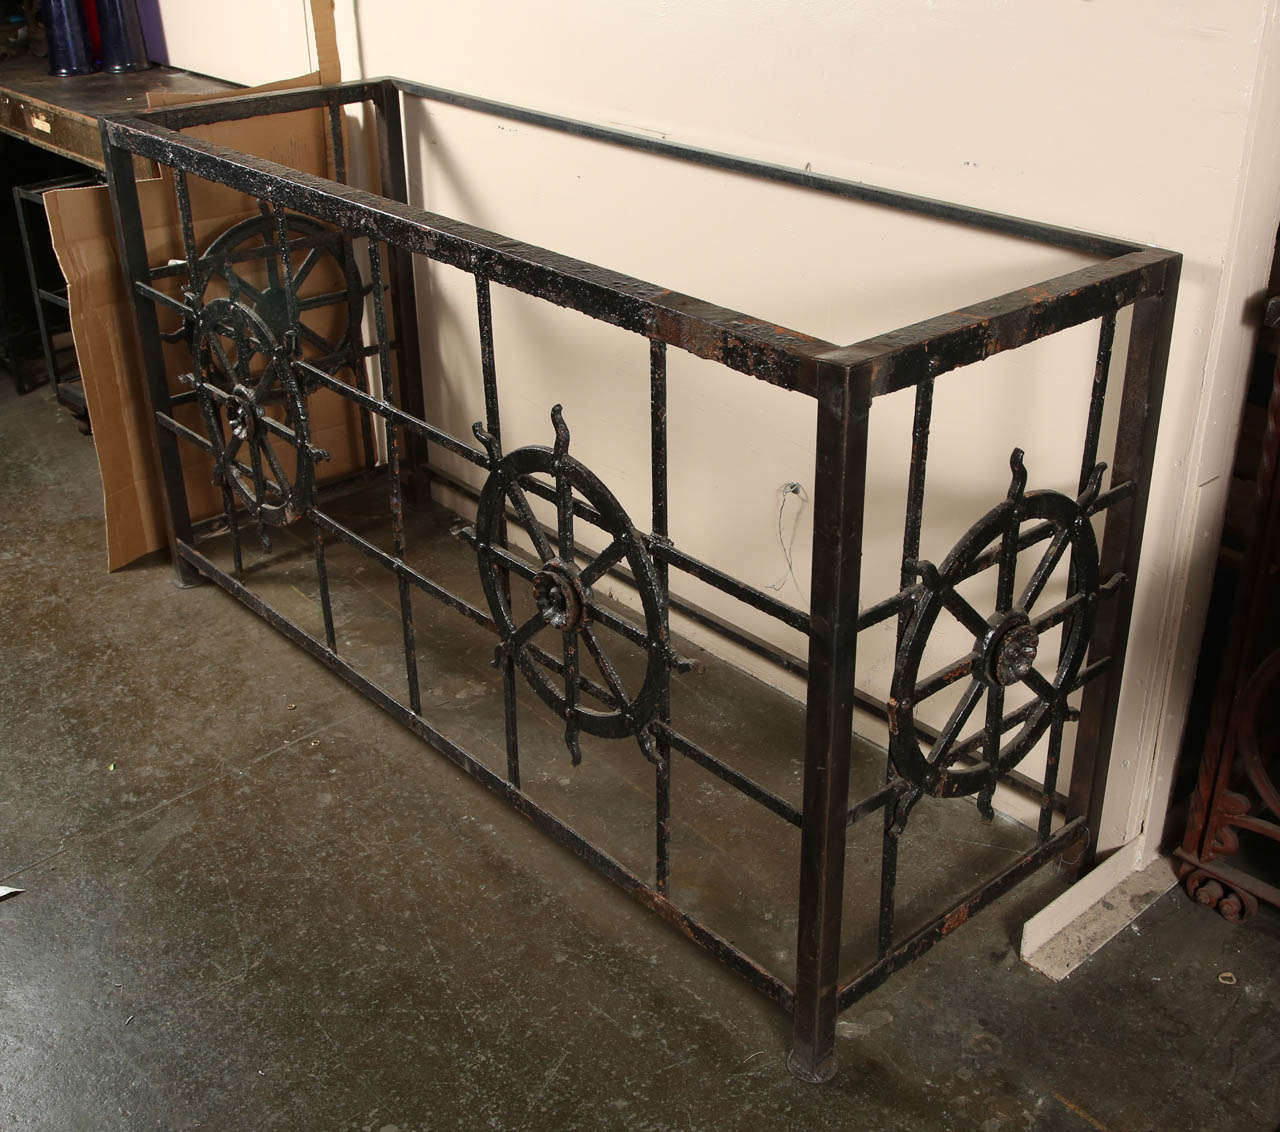 This is a cast iron black console table. Recently made from a salvaged balcony. It has cross hatch metal sides with cast iron ship wheels welded on to the sides. This can be seen at our 1800 South Grand Ave location in Downtown Los Angeles, CA.